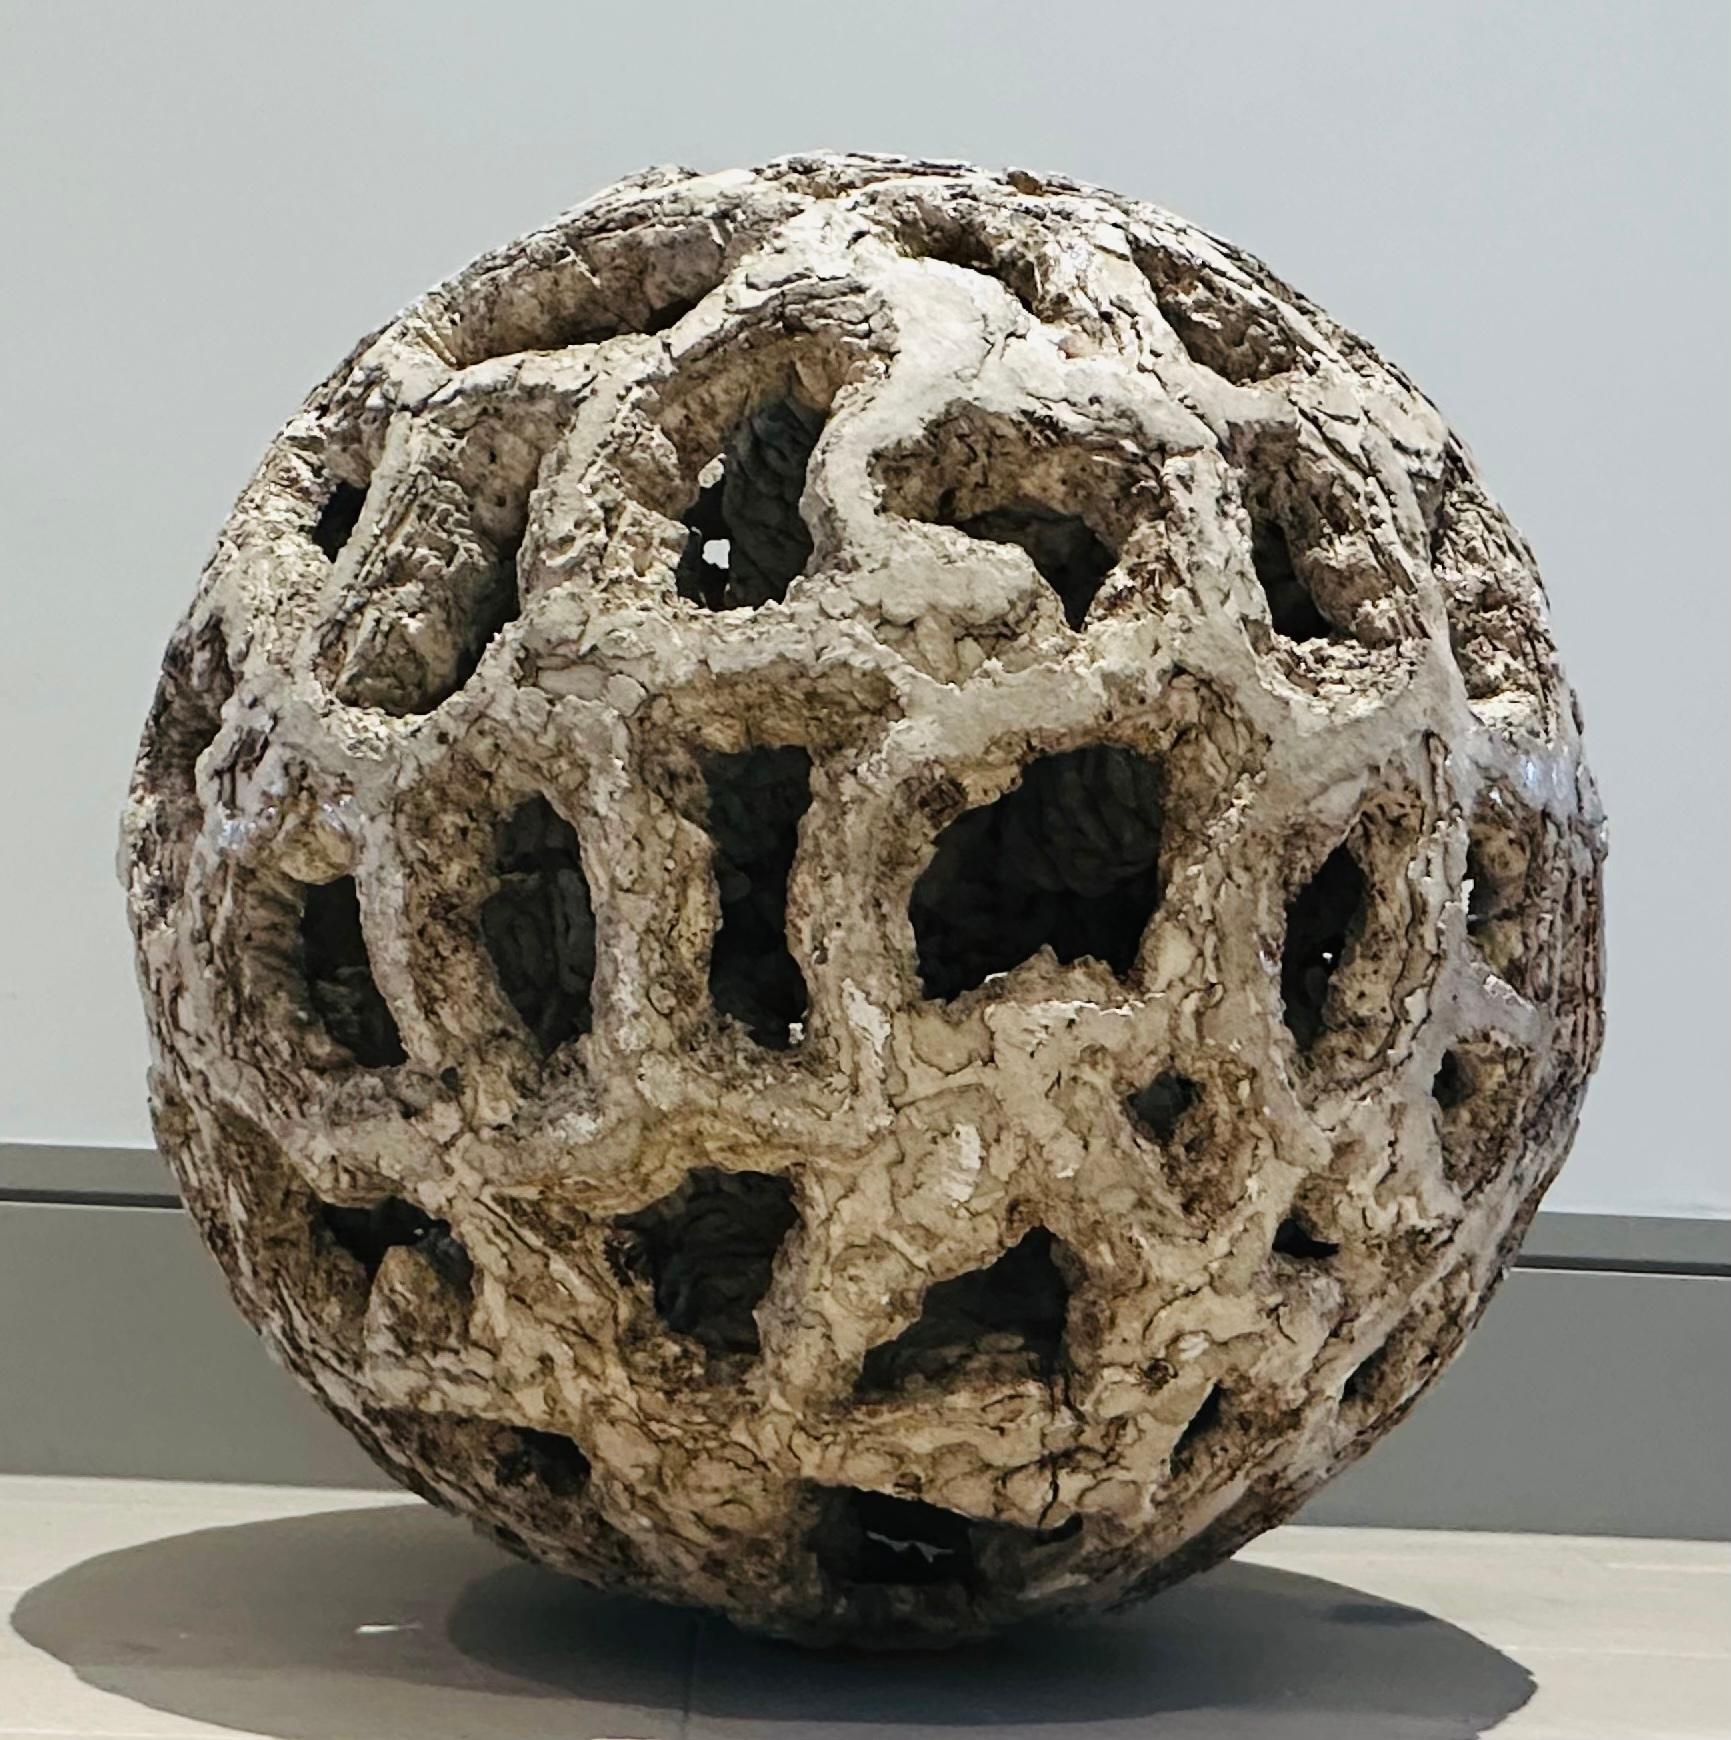 1960s French abstract terracotta space-age futuristic sculpture in the form of a volcanic rock.  An unusual volcanic, lunar rock or coral designed sculpture with a glazed and unglazed rough surface with amoeba shaped holes which allow you to peer